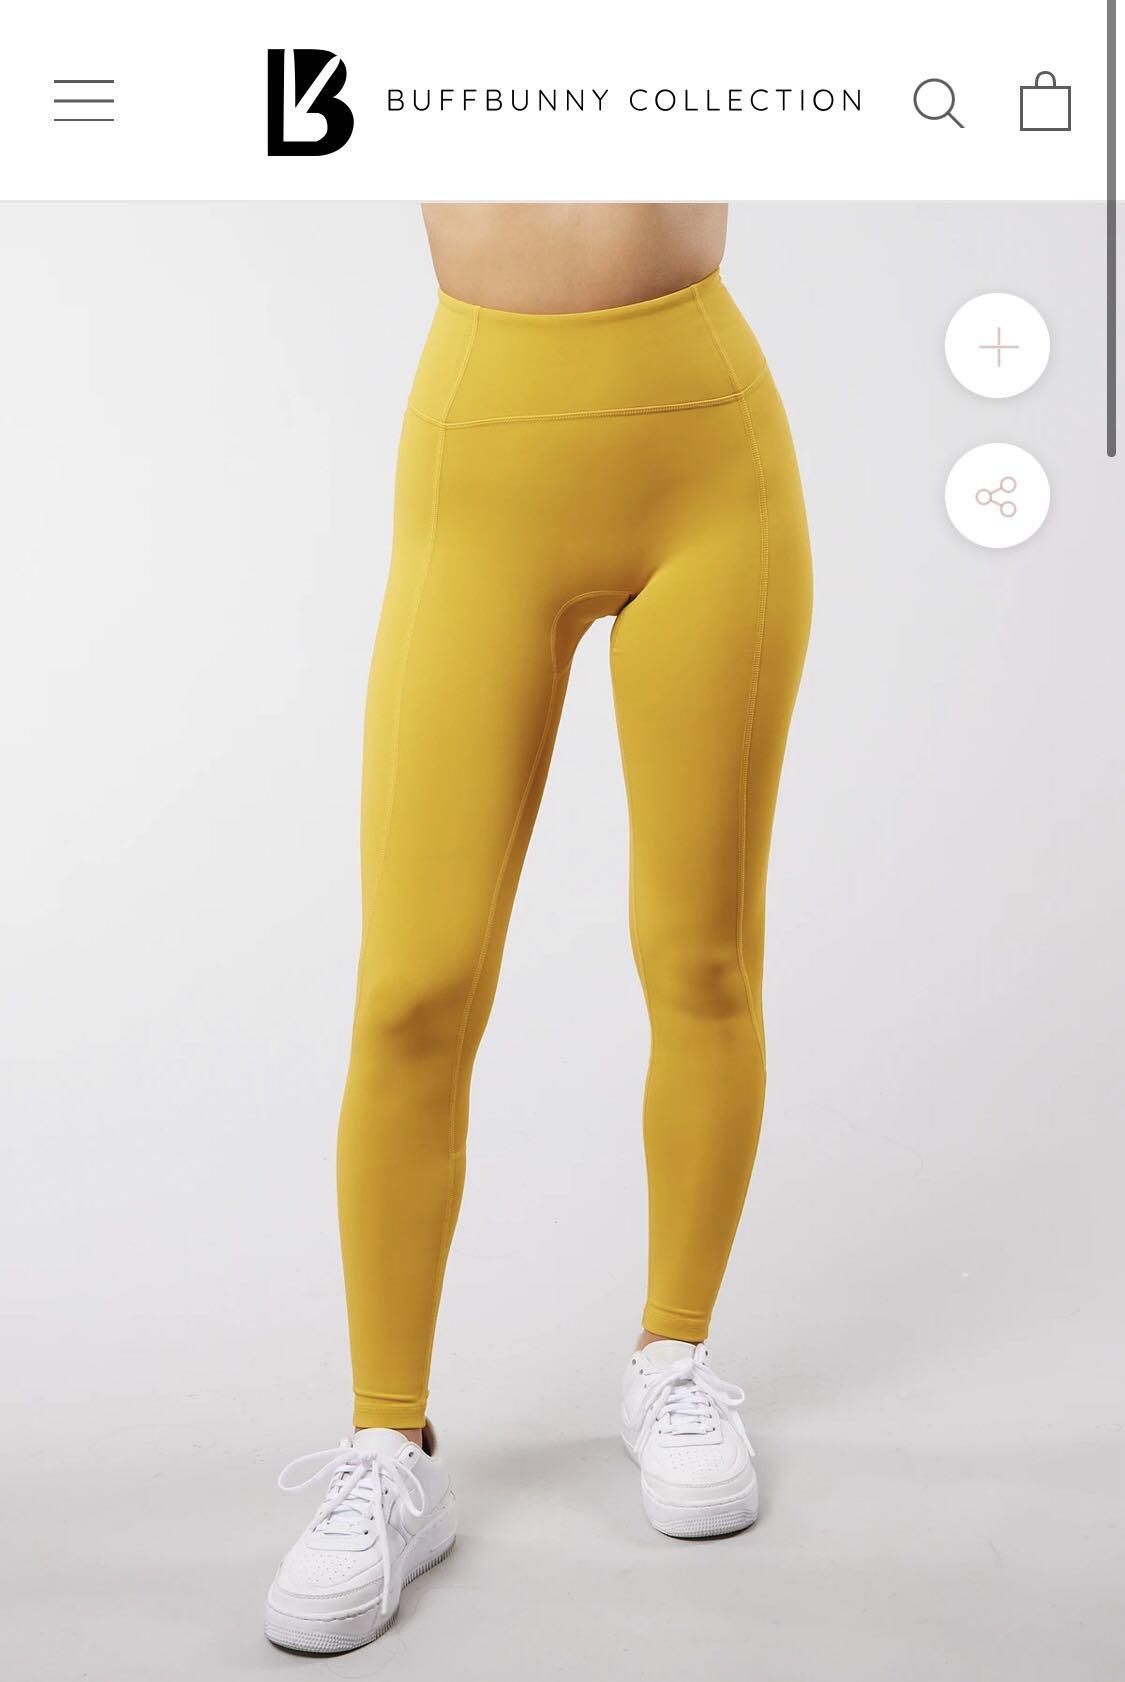 buffbunny outlaw legging xs, Women's Fashion, Activewear on Carousell